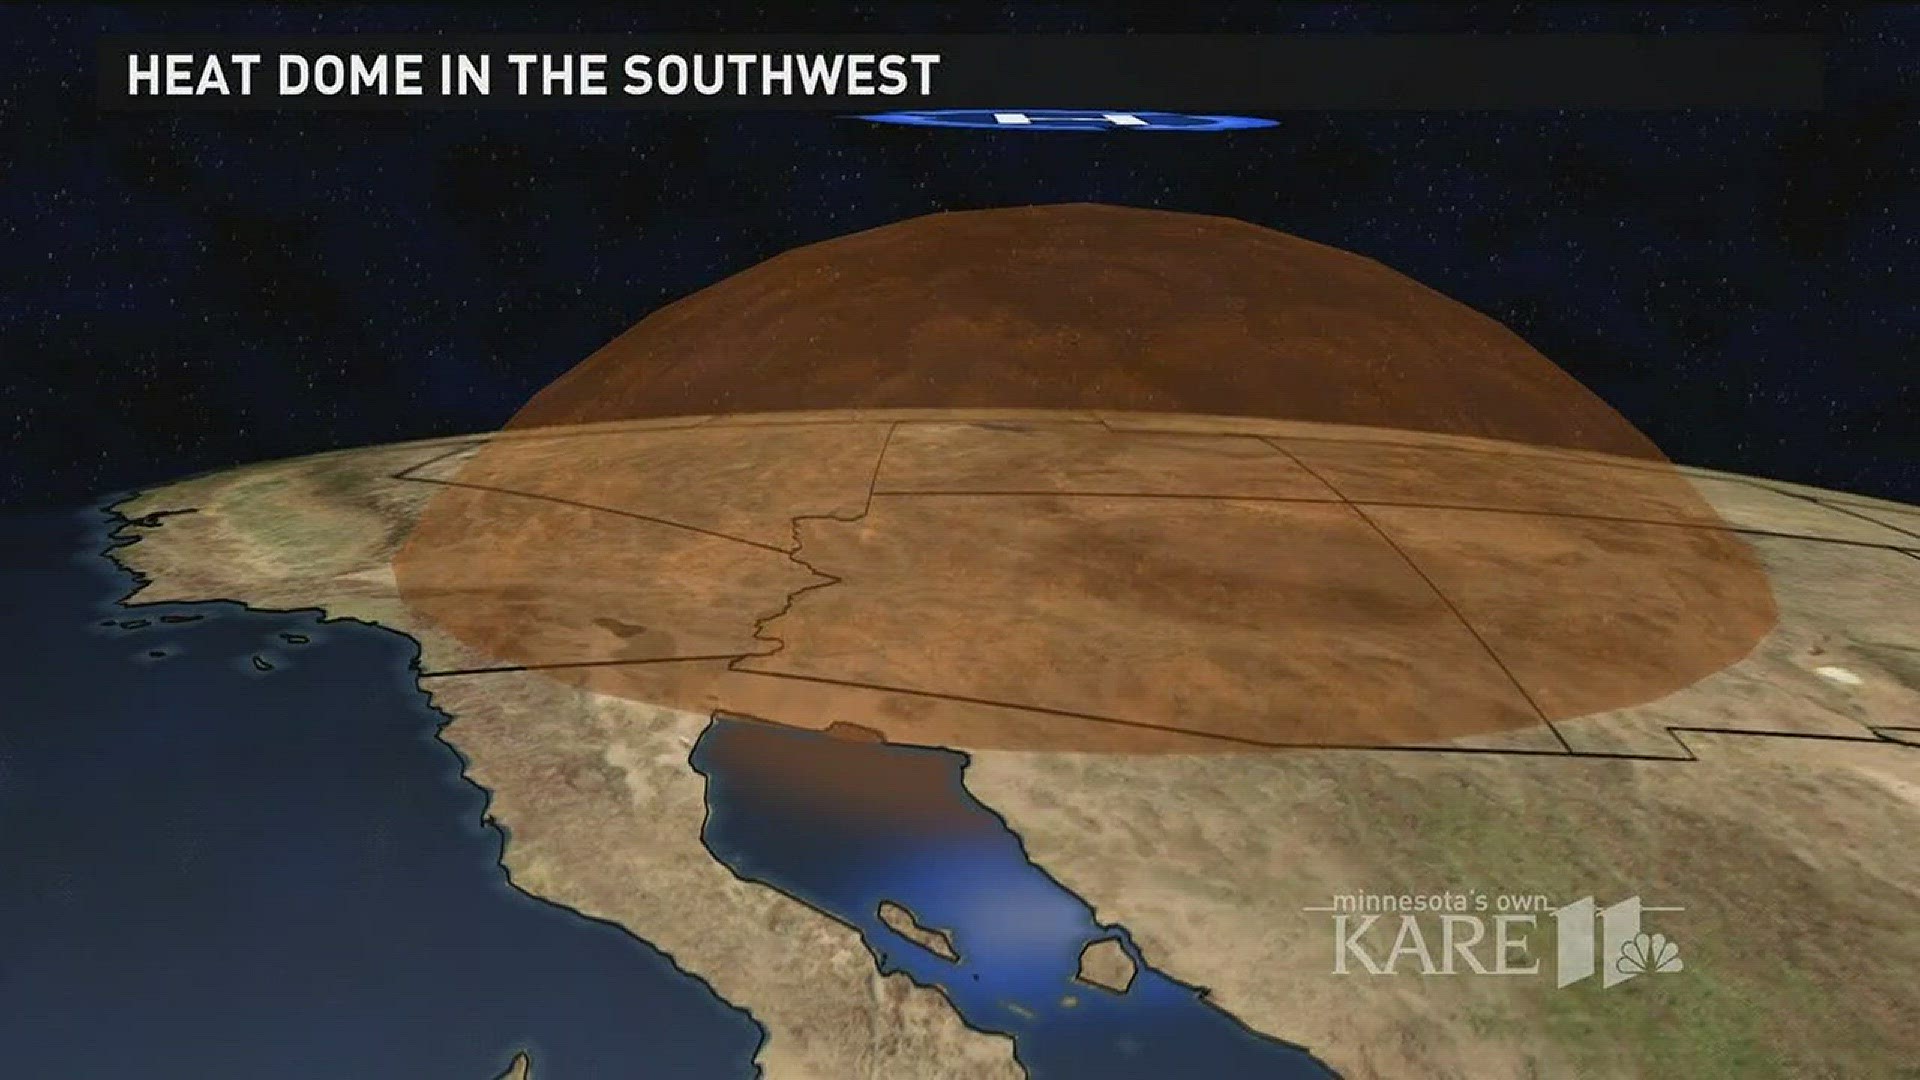 The heat dome over the southwest